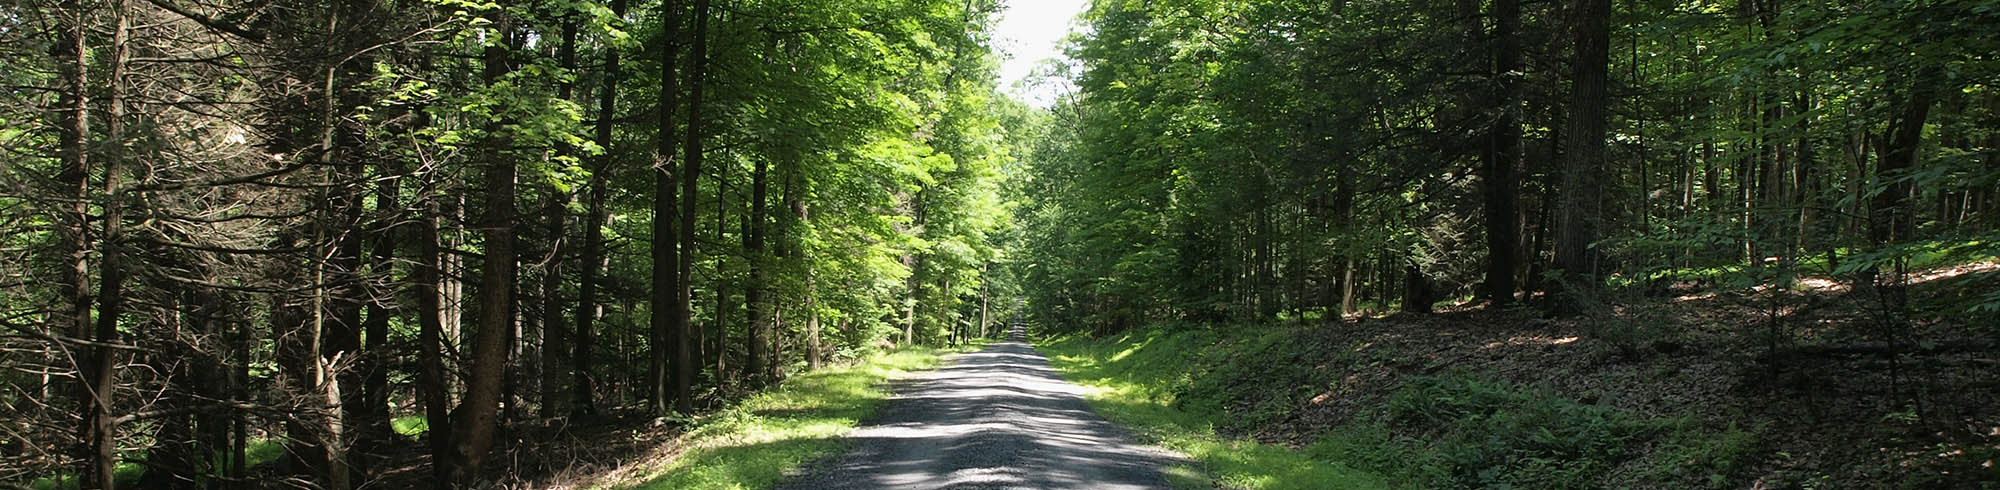 Country road in the northeast lined with trees